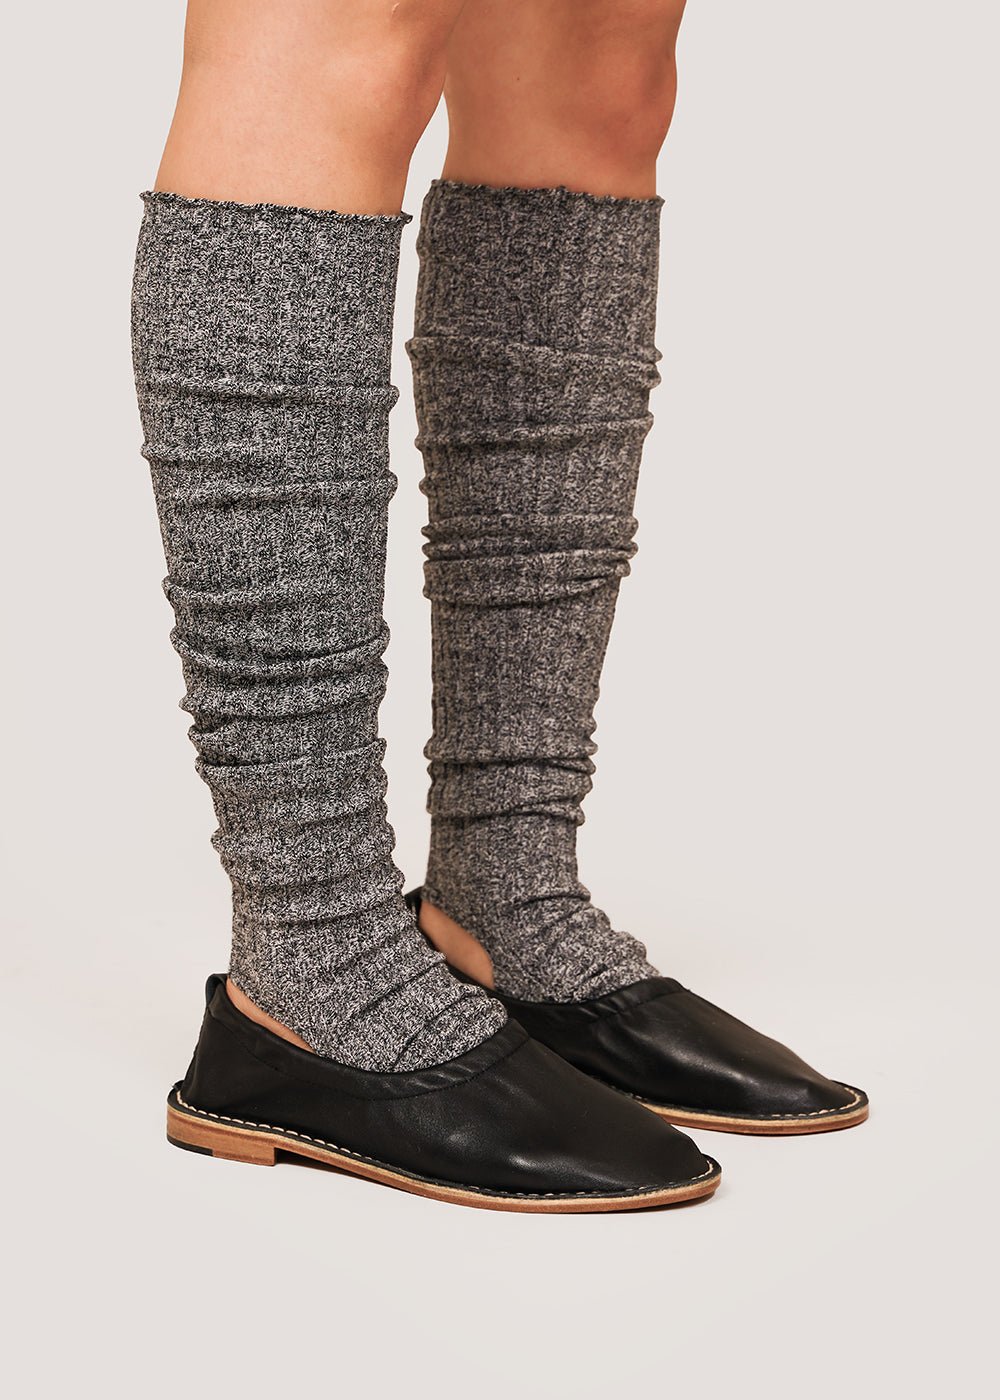 Winter Leg Warmers - Assorted Styles - Global Connections